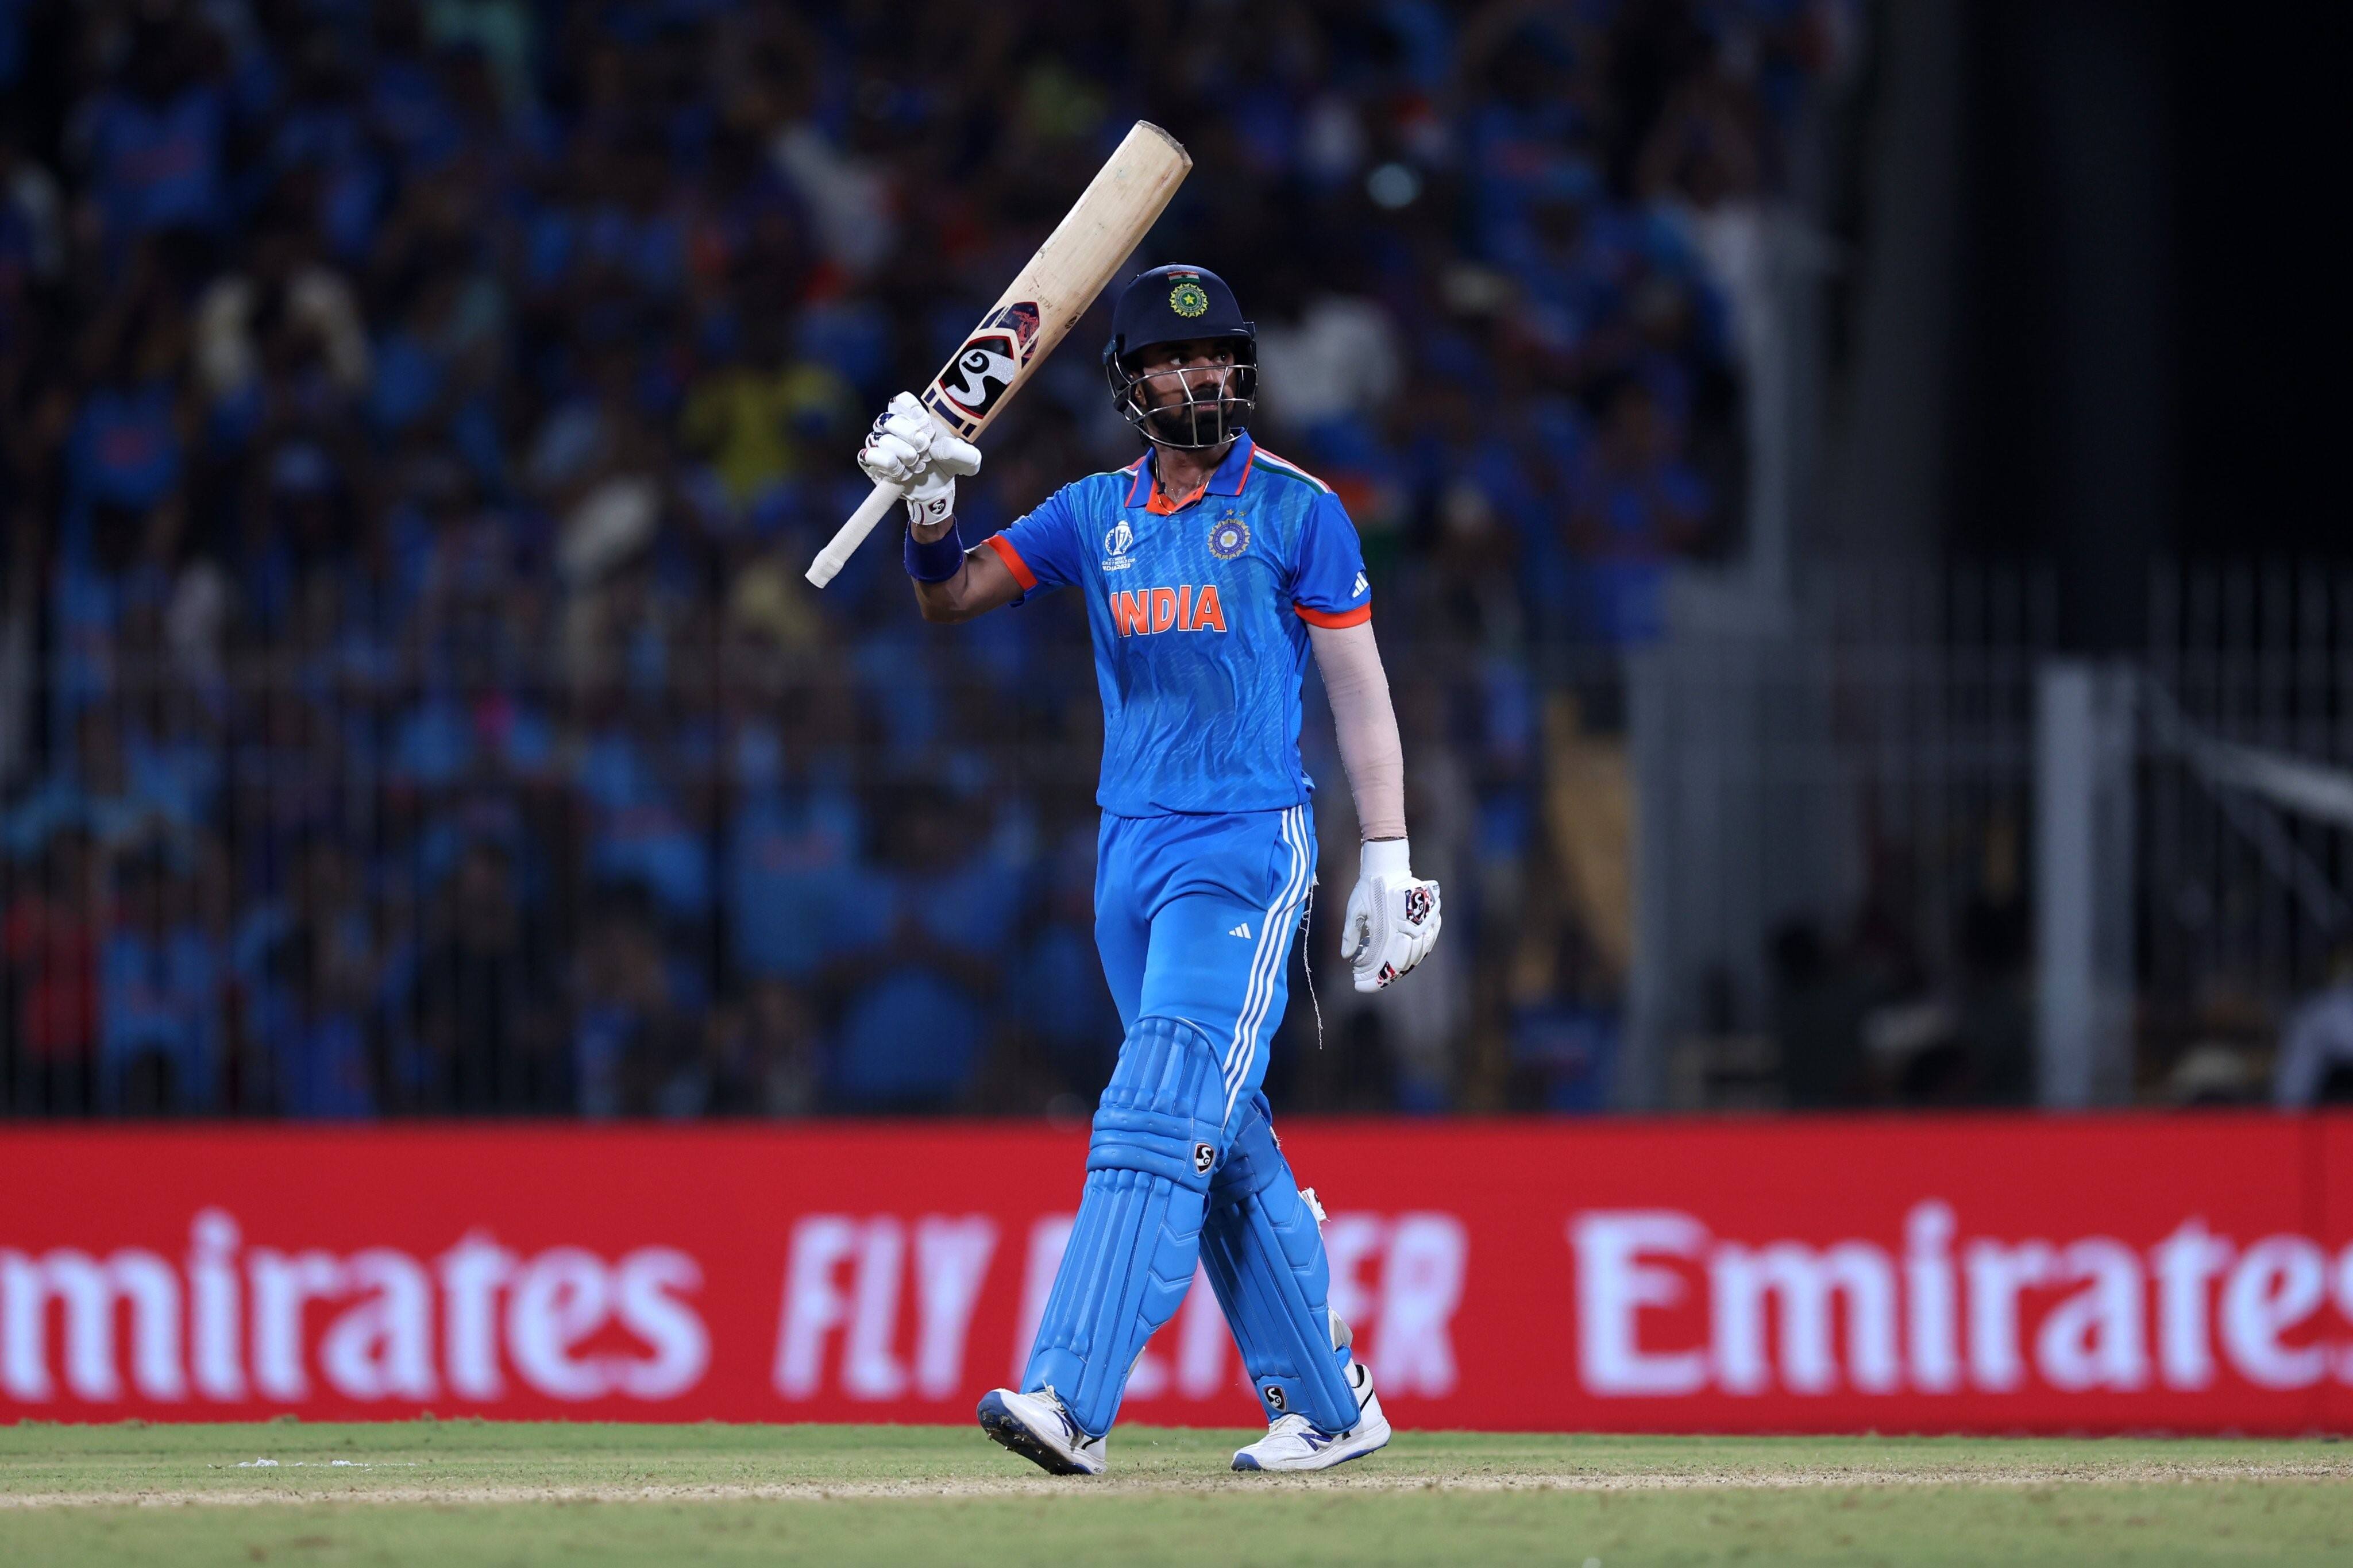 The entire Cricket fans Gives Standing Ovation to the Virat Kohli for his powerful performance against Australia in World Cup Cricket at Chennai rsk